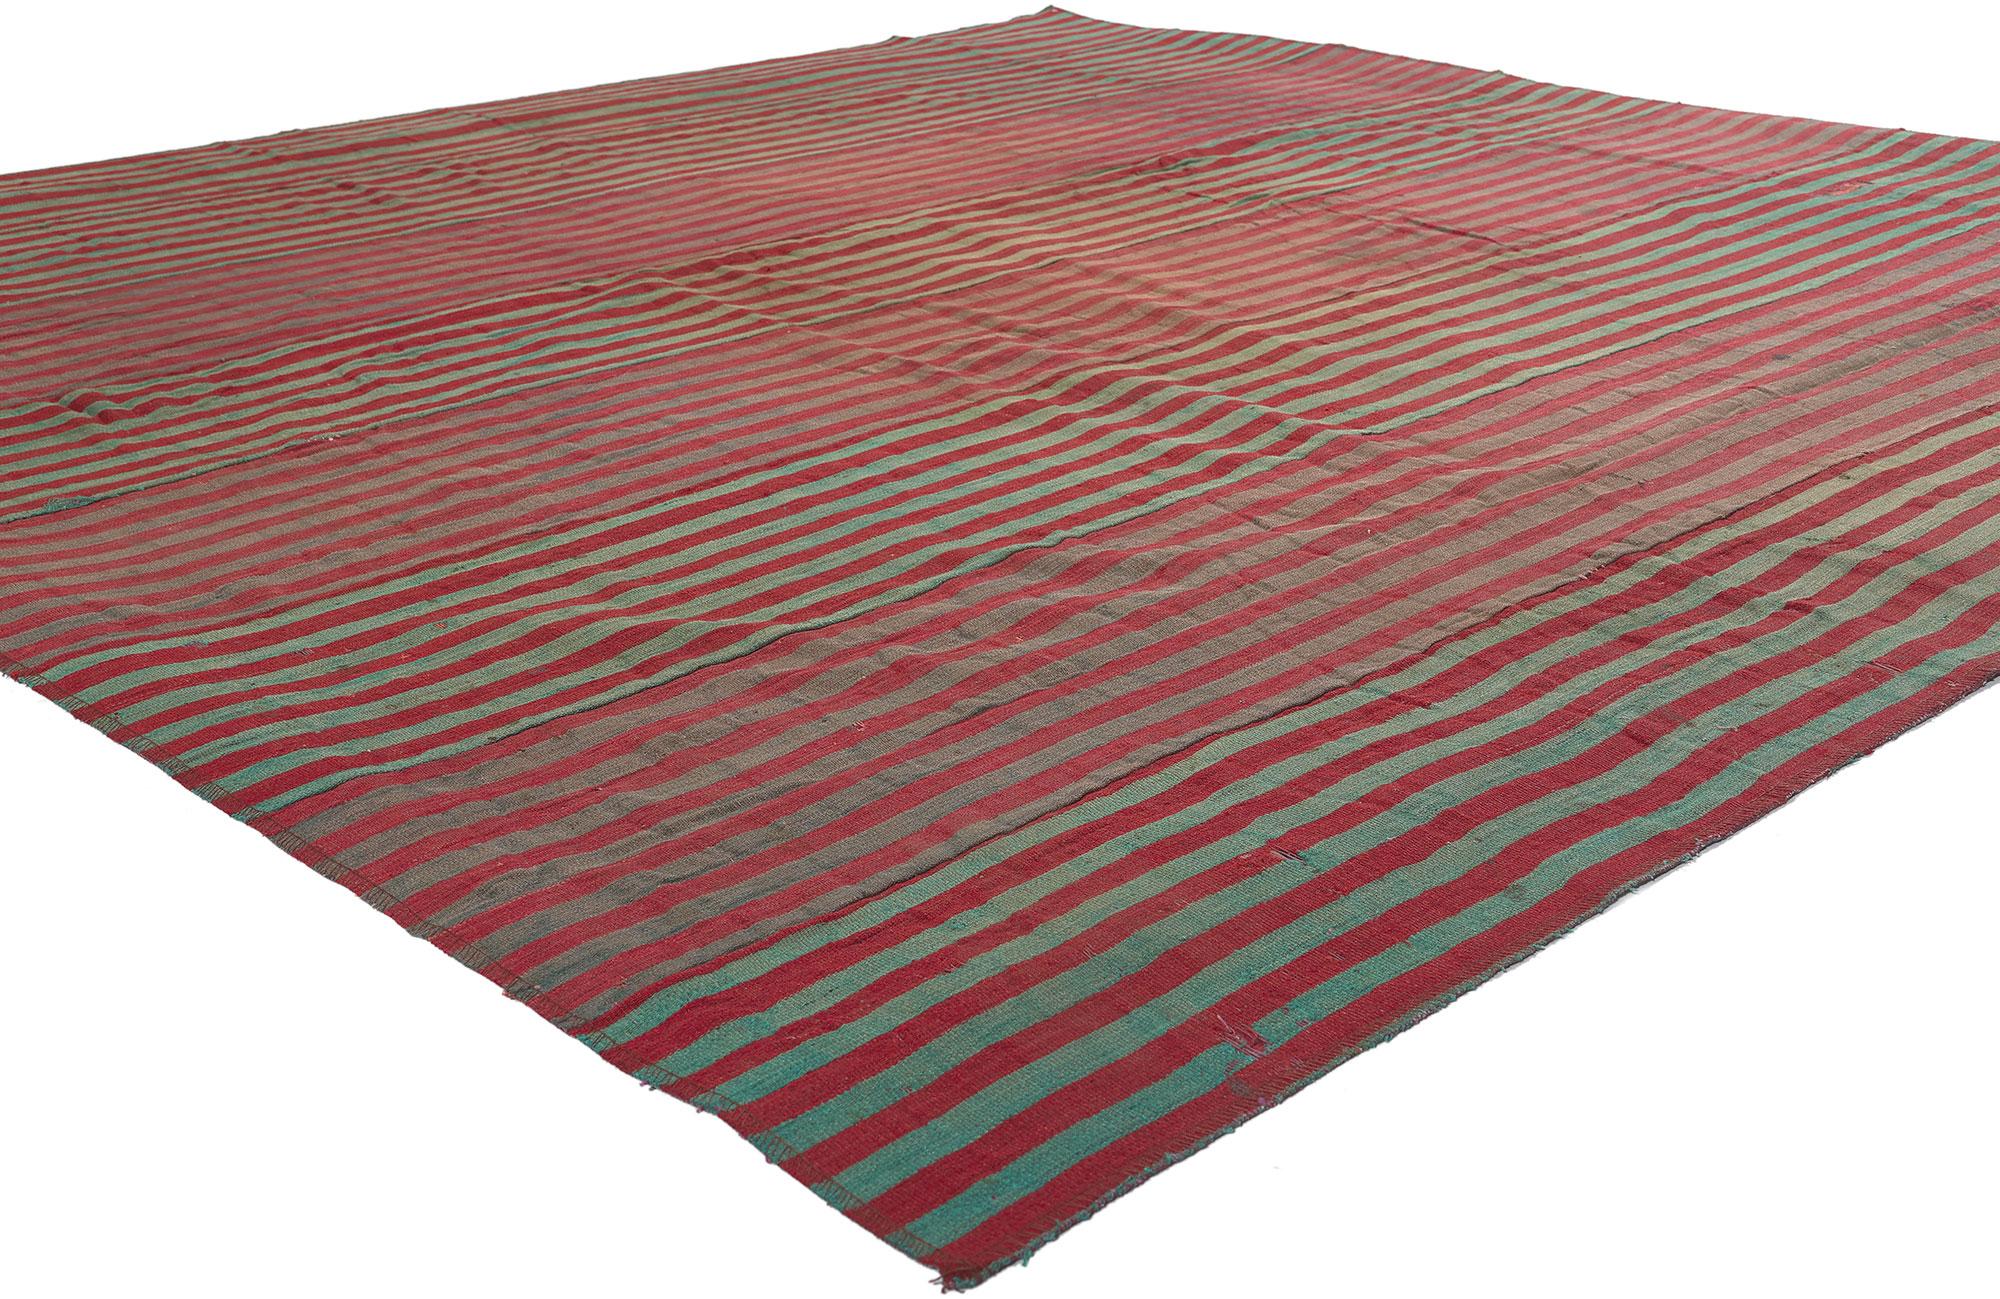 60654 Rustic Vintage Turkish Striped Kilim Rug, 07'03 x 07'06.
Weathered charm meets rustic sensibility in this handwoven wool vintage Turkish kilim rug. The Bengal stripe pattern and faded colors woven into this piece work together creating a